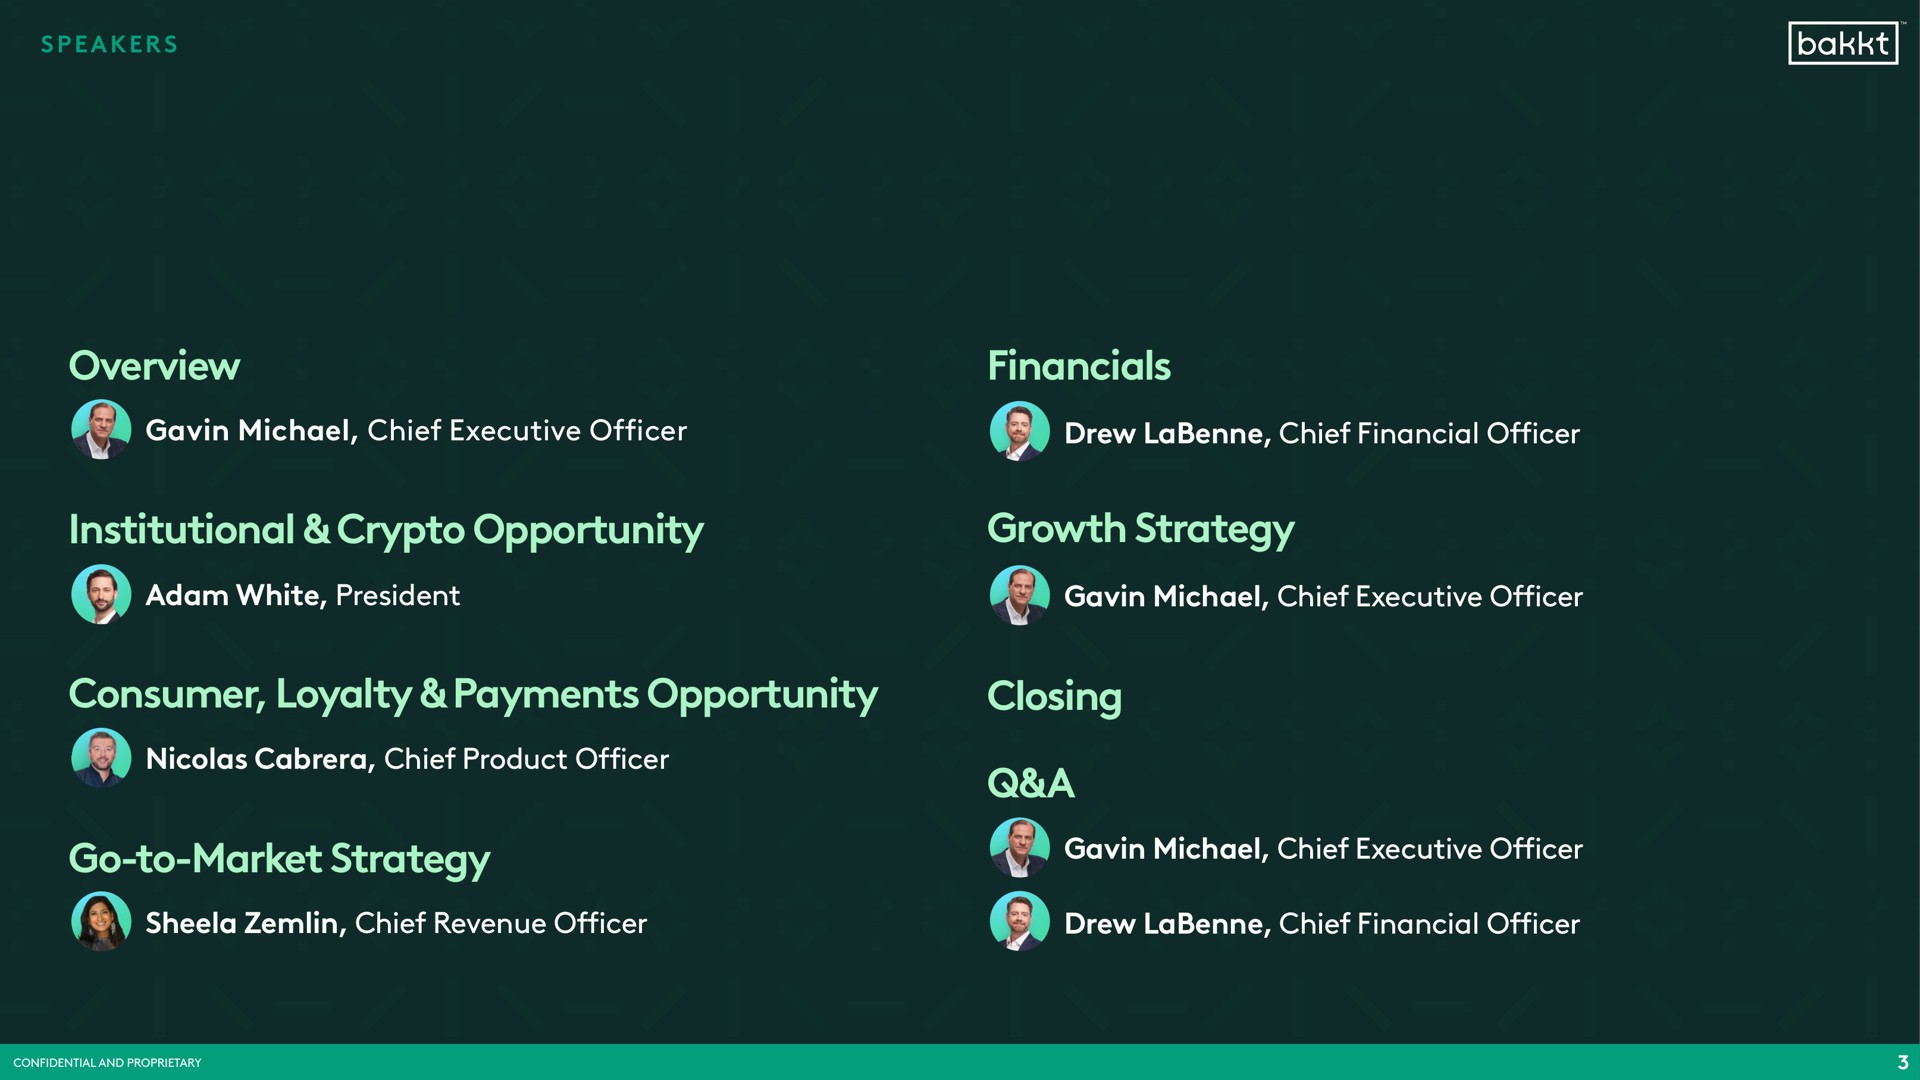 overview institutional opportunity growth strategy consumer loyalty payments opportunity closing a go to market strategy | Bakkt